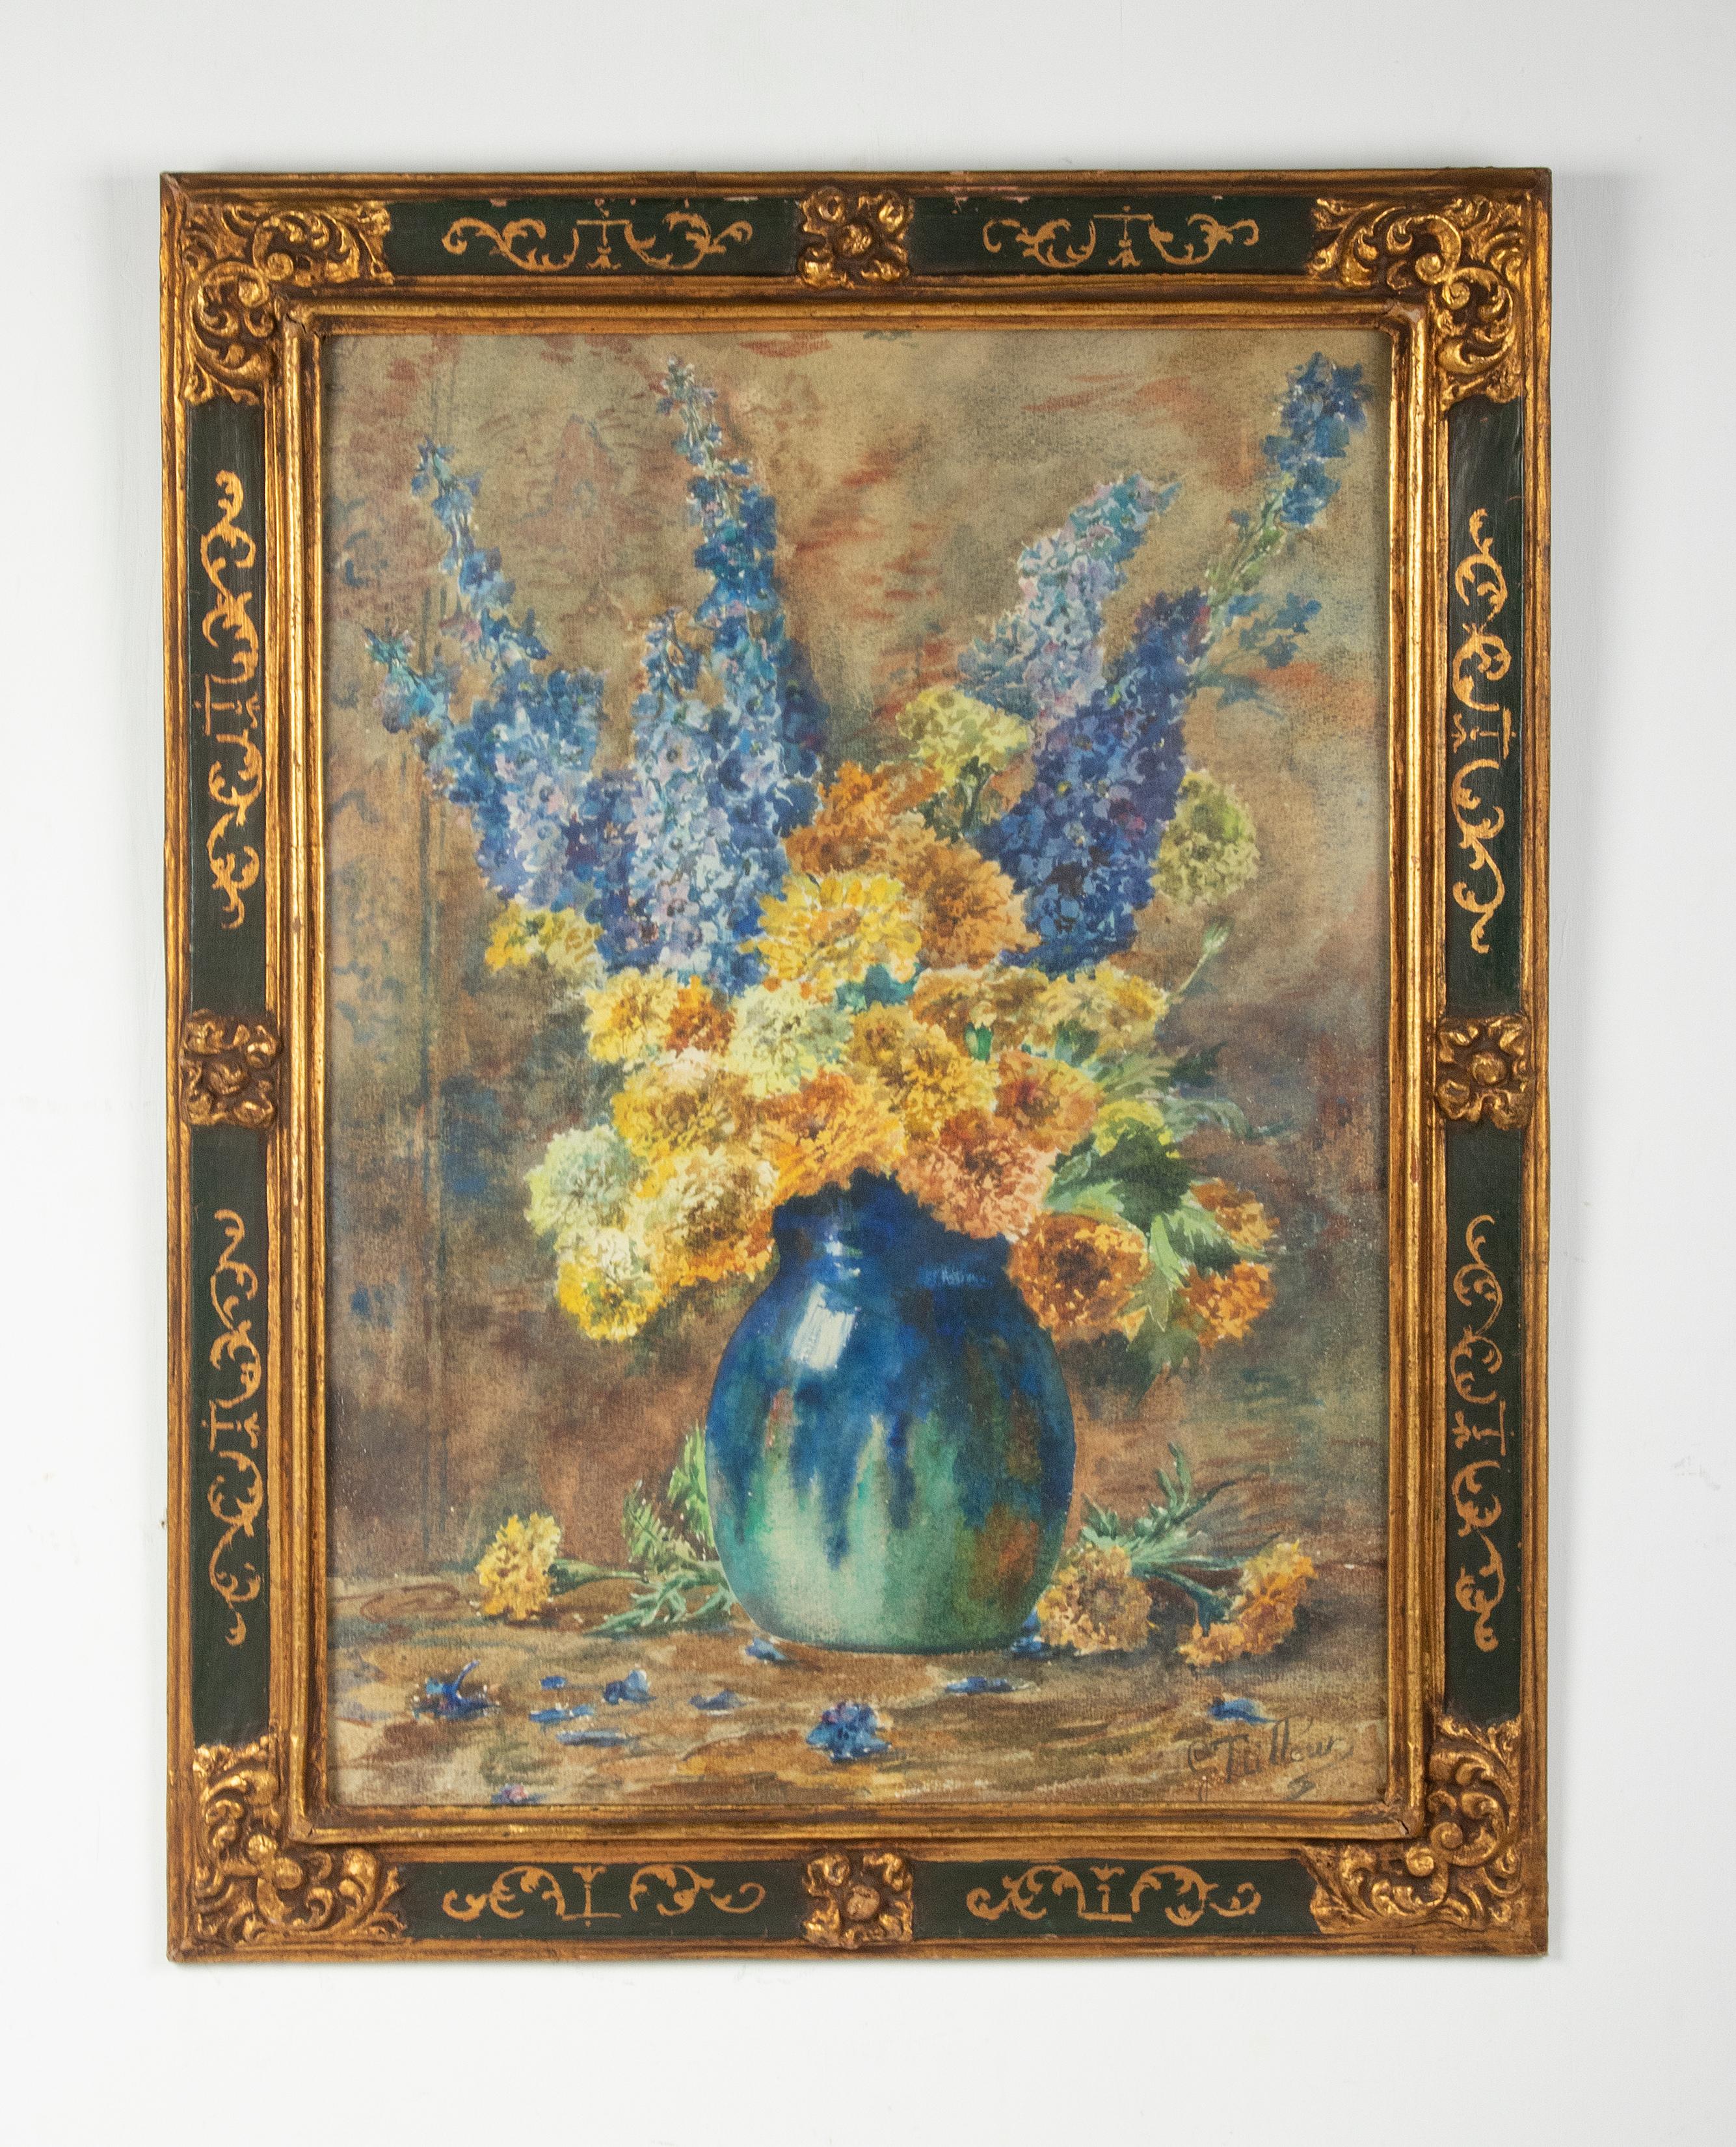 Beautiful flower still life, painted in watercolor, by the French female artist Germaine Mélanie Tailleur. The painting dates from circa 1910-1920. The painting has a lively use of color, the blue color of the delphinium flowers contrasts